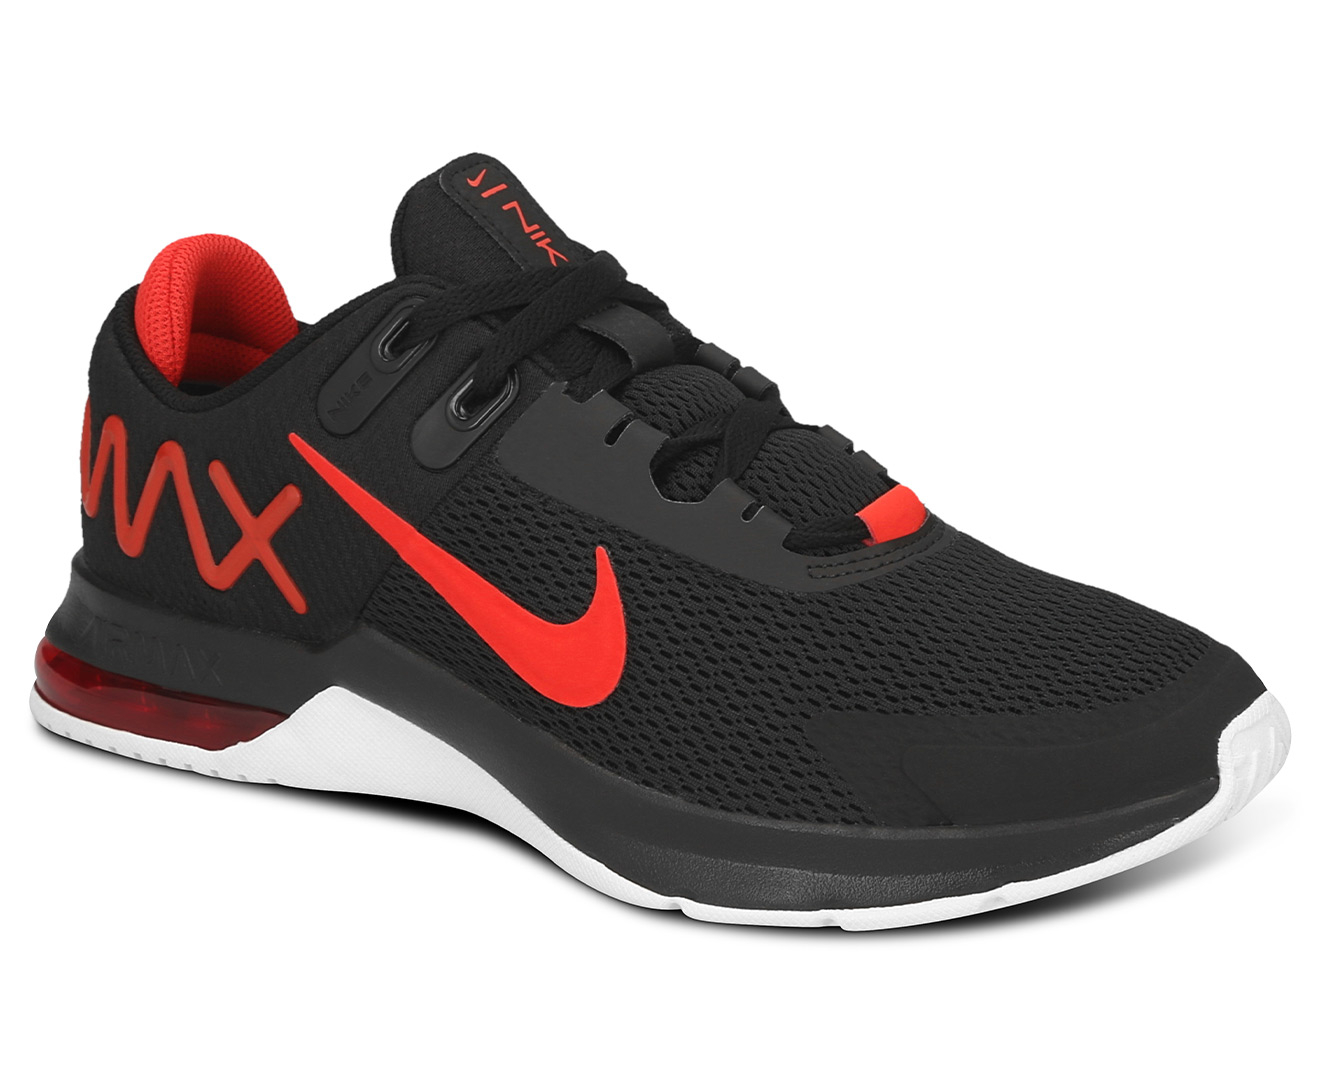 Nike Men's Air Max Alpha Trainer 4 Training Shoes - Black/Chile Red ...